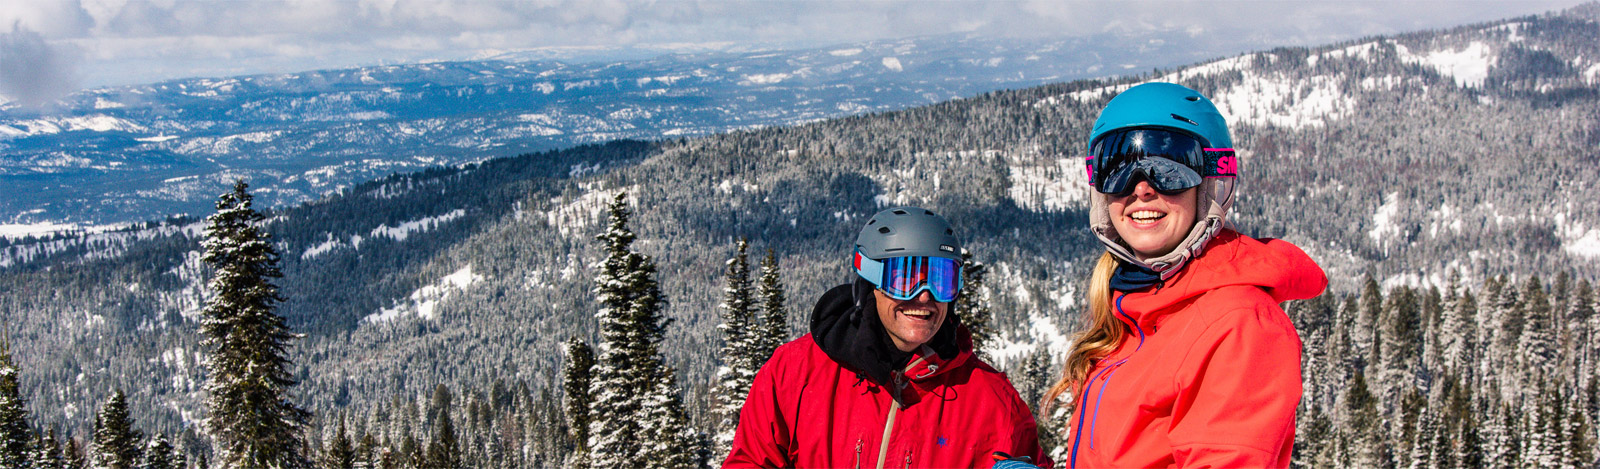 Idaho Ski slopes for the ultimate ski and snowboard experience